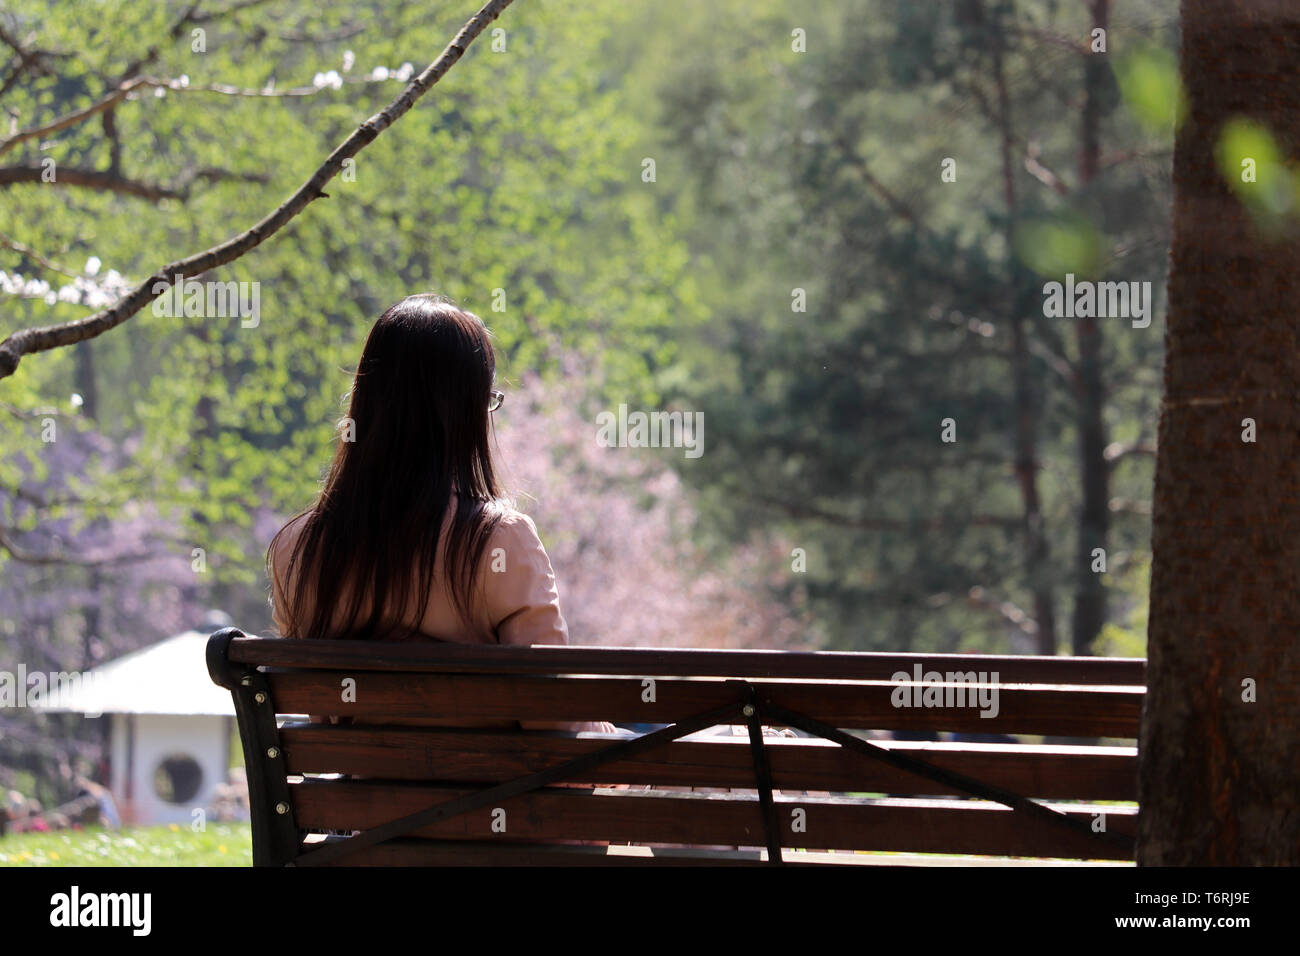 Girl in glasses sits on a wooden bench in a spring japanese garden during cherry blossom season, rear view. Concept of dreaming, romantic mood Stock Photo